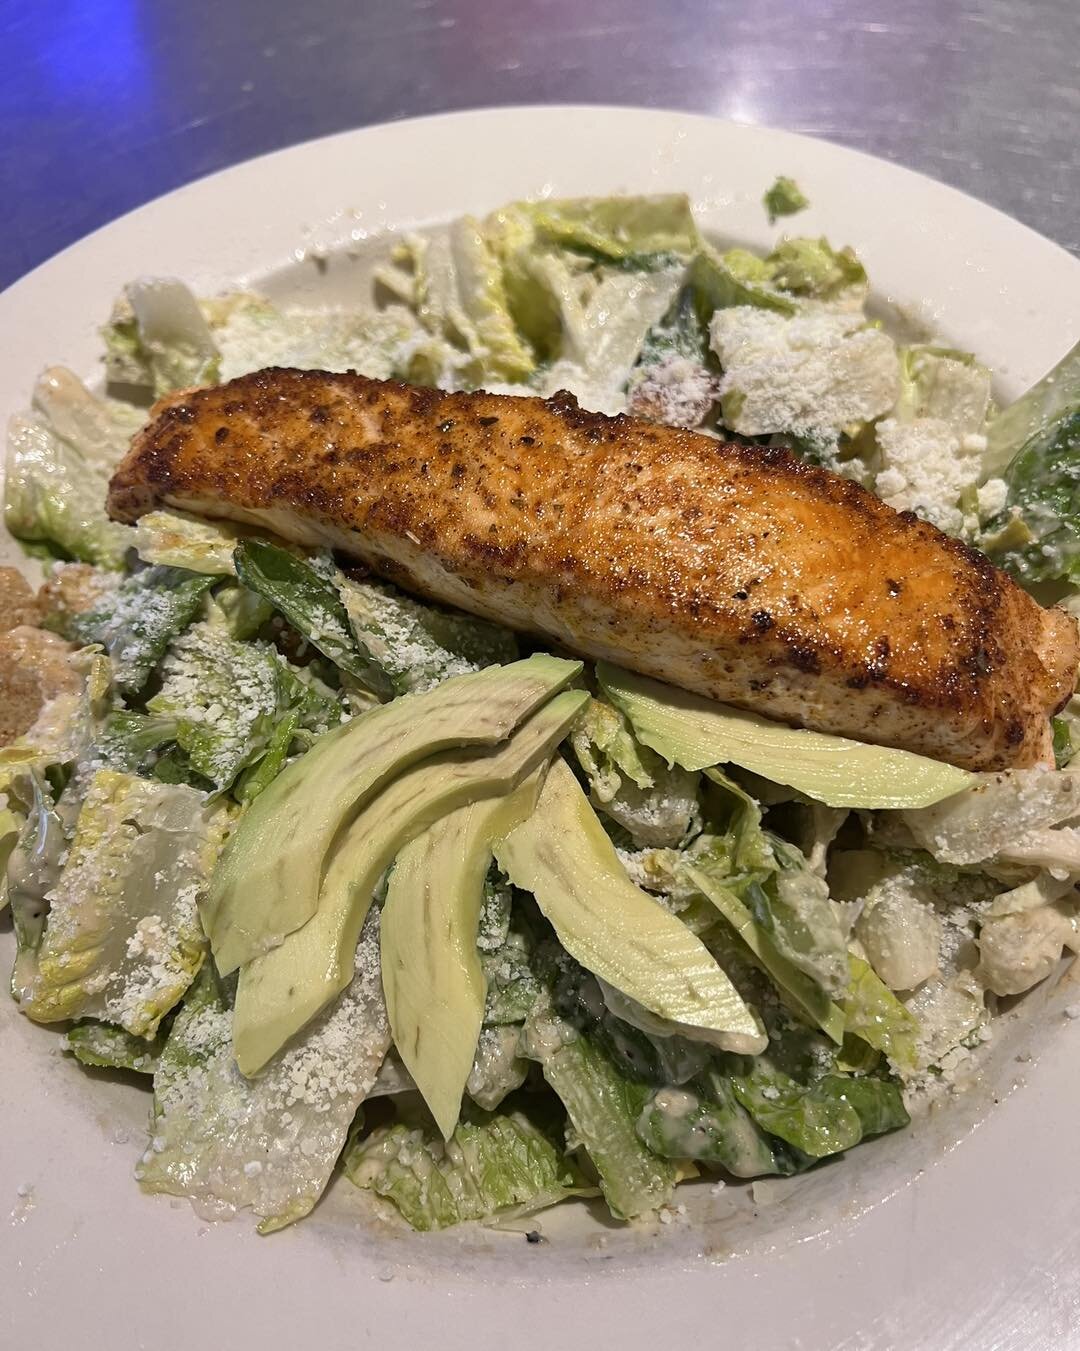 Come try our delicious Salmon Caesar Salad! 🥗